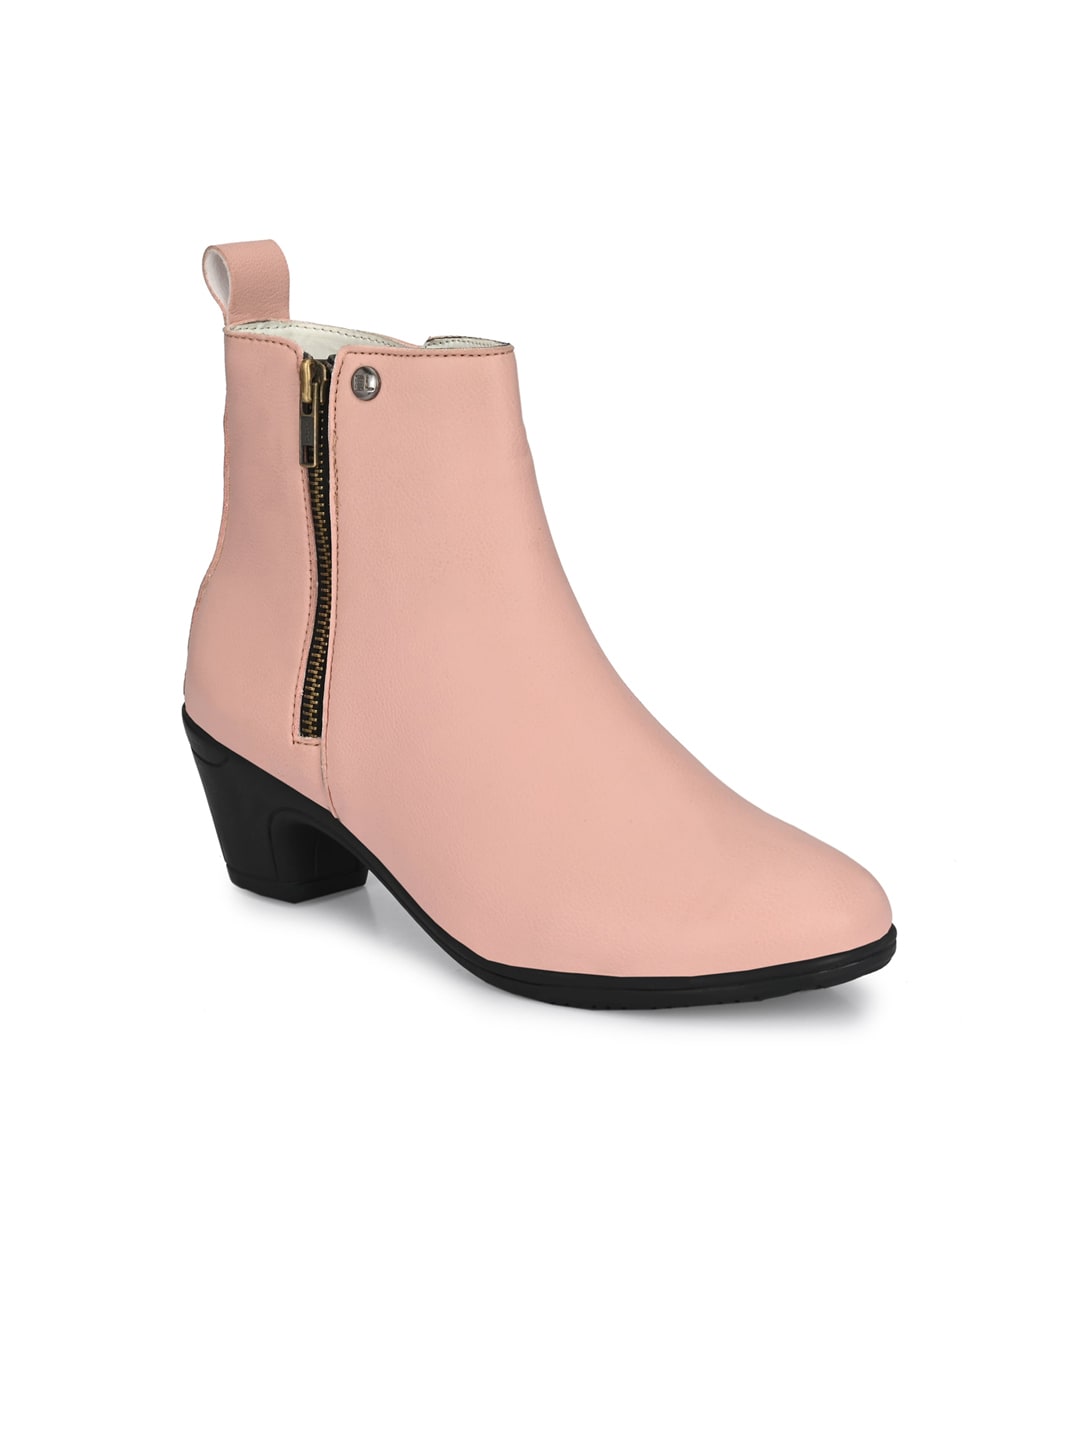 El Paso Pink Block Heeled Boots Price in India